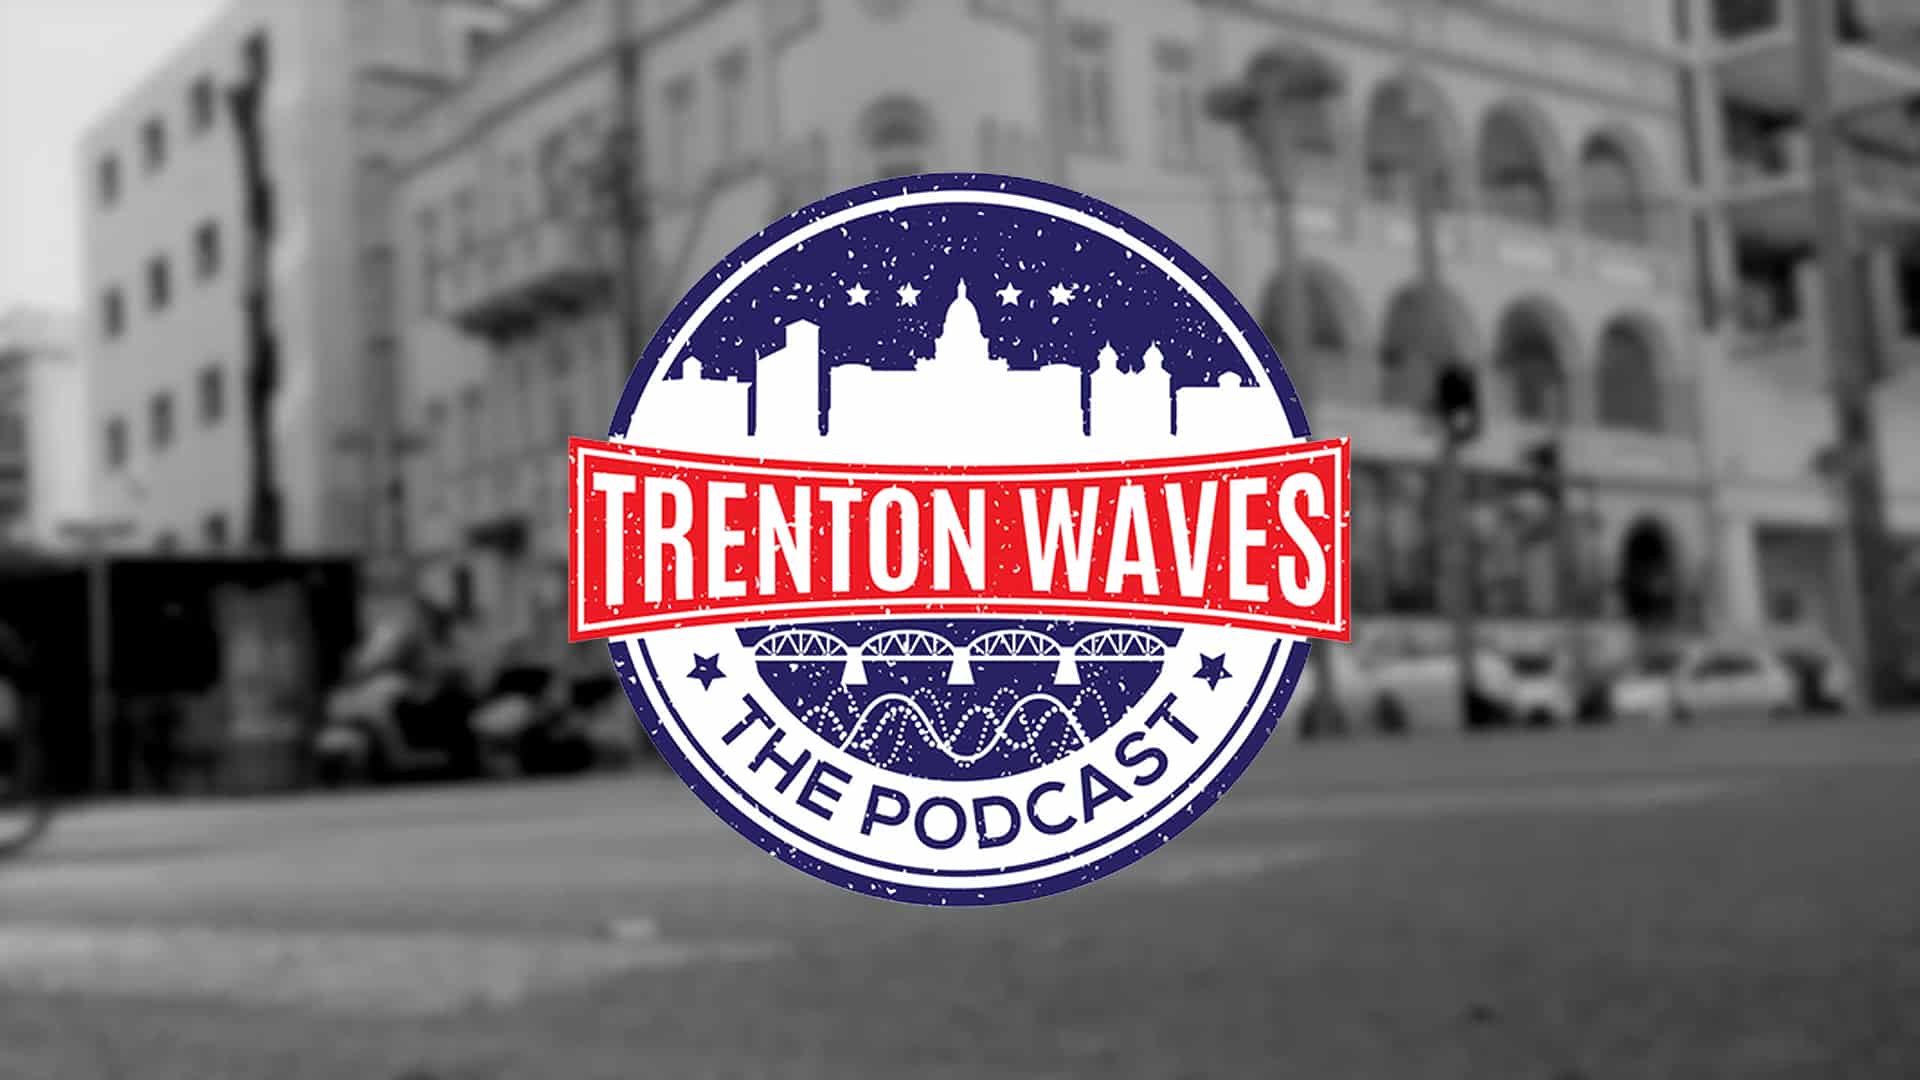 Trenton Wave Podcast hosted by Frank Sasso